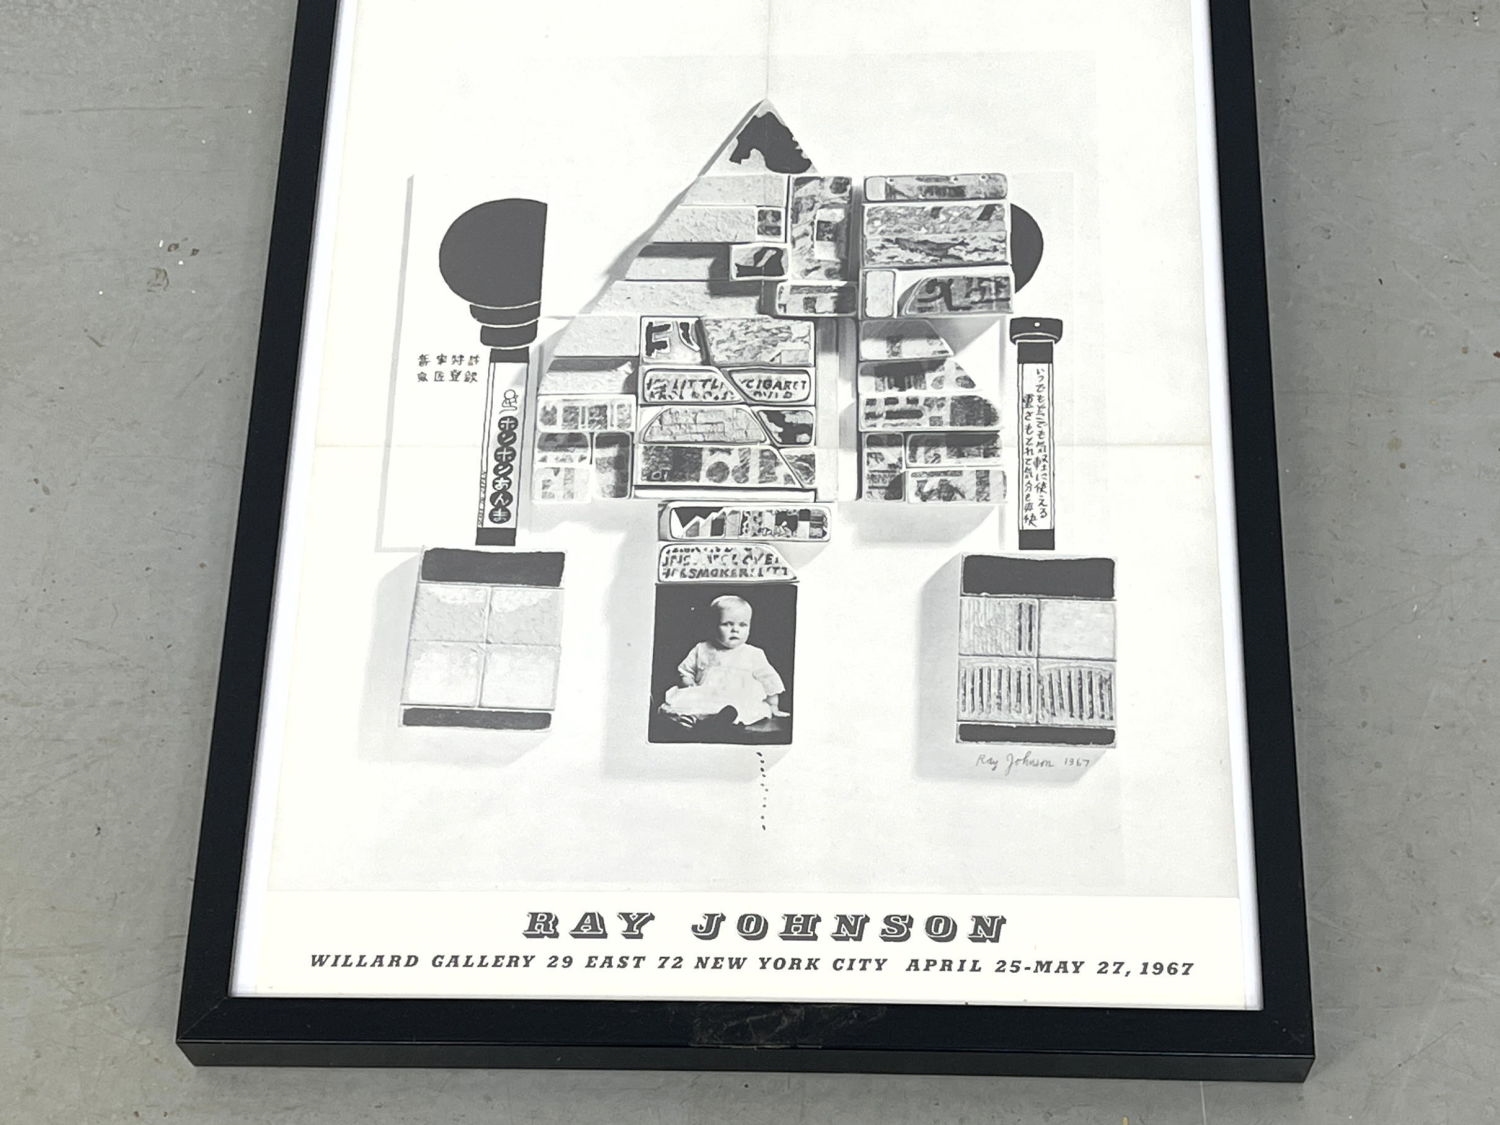 Artwork by Ray Johnson, Ray Johnson 1967 Exhibition Poster. WILLARD GALLERY, NYC. Framed., Made of Poster